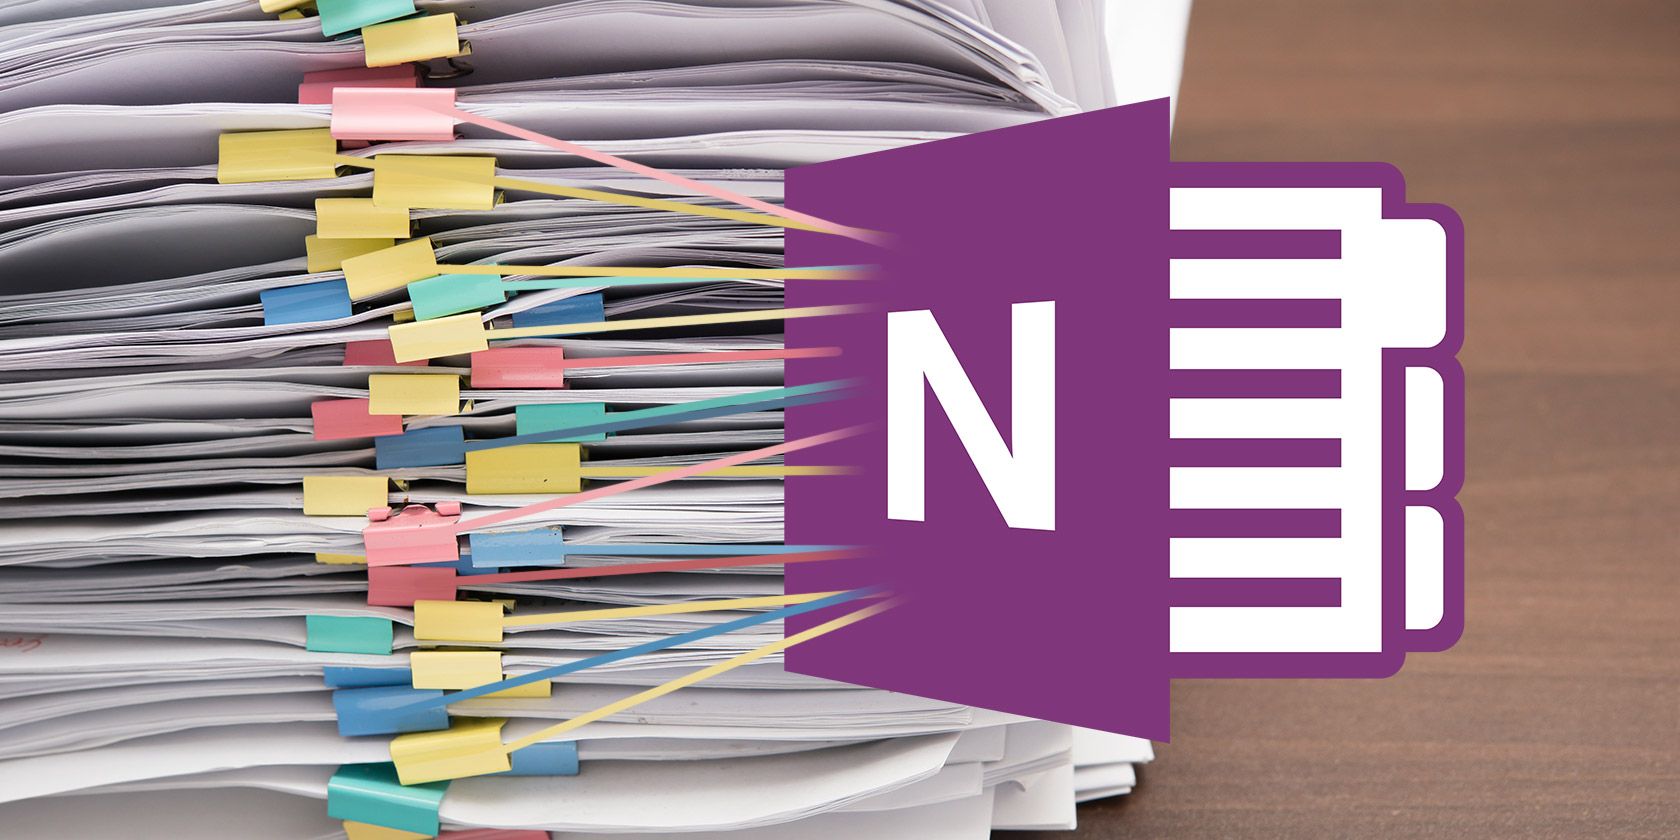 How to Create a Personal Wiki Using Microsoft OneNote